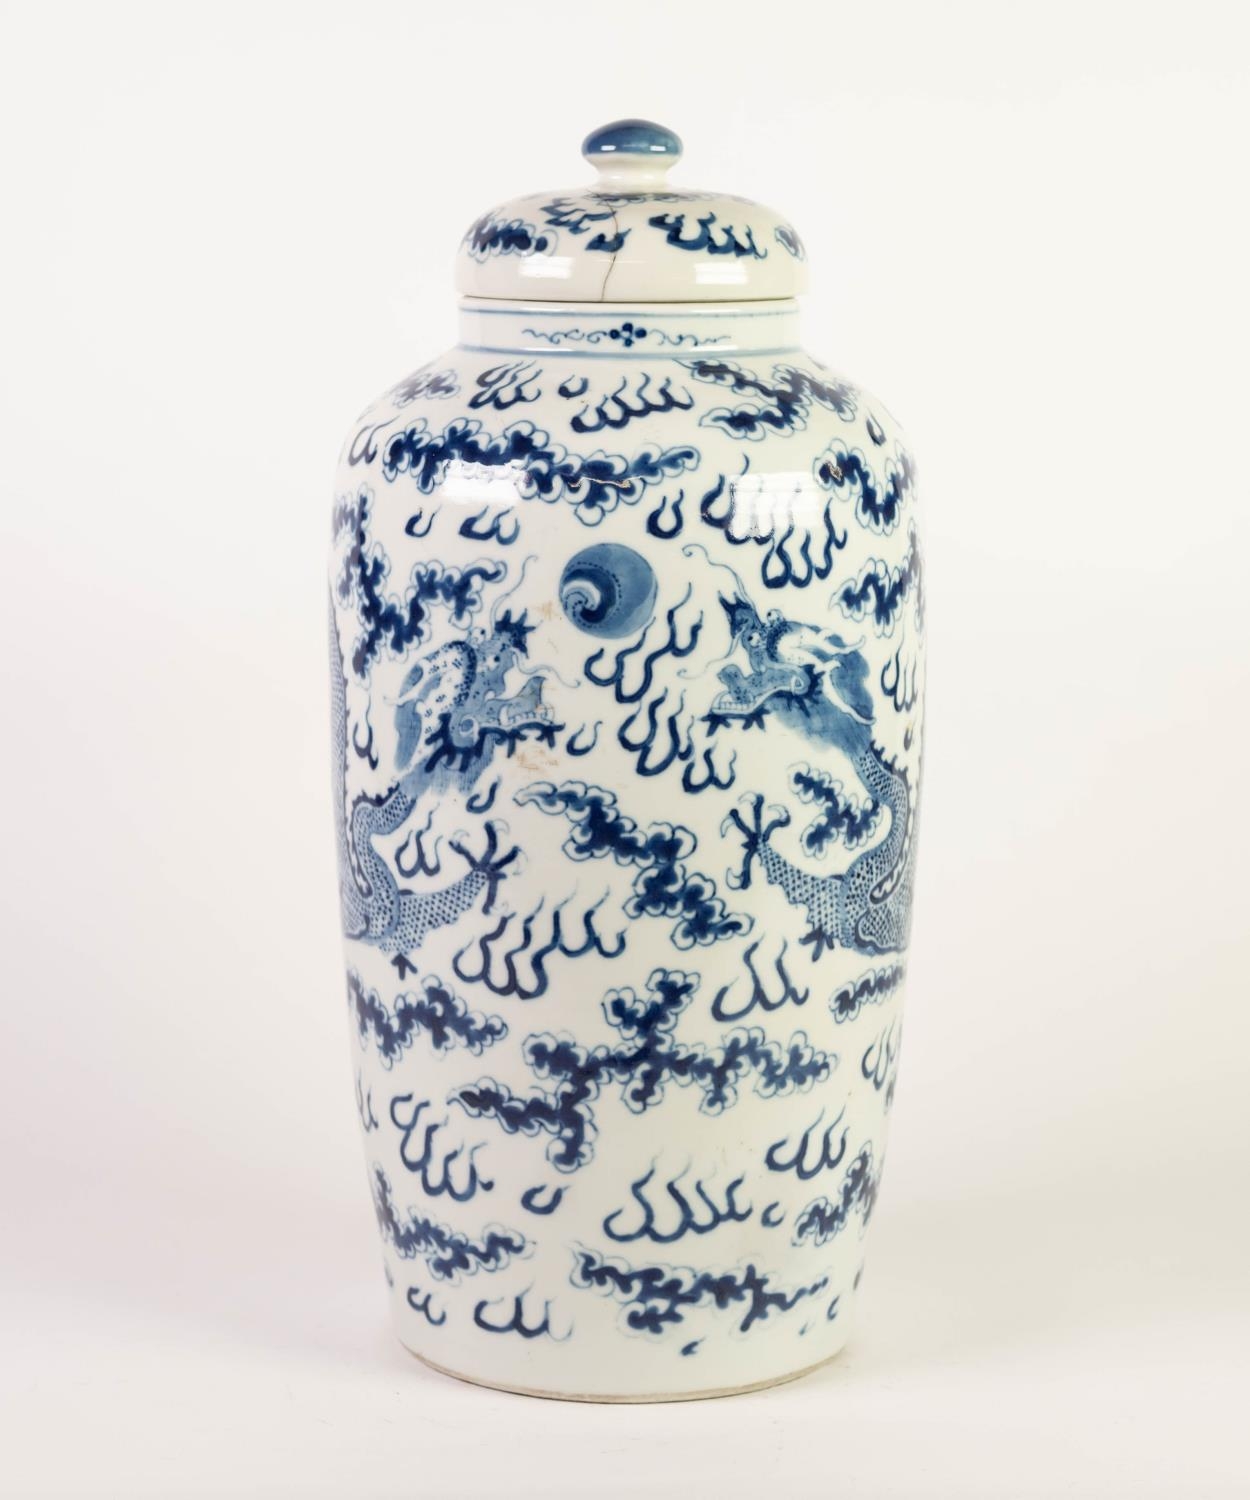 NINETEENTH CENTURY CHINESE BLUE AND WHITE PORCELAIN VASE AND COVER, of cylindrical form with domed